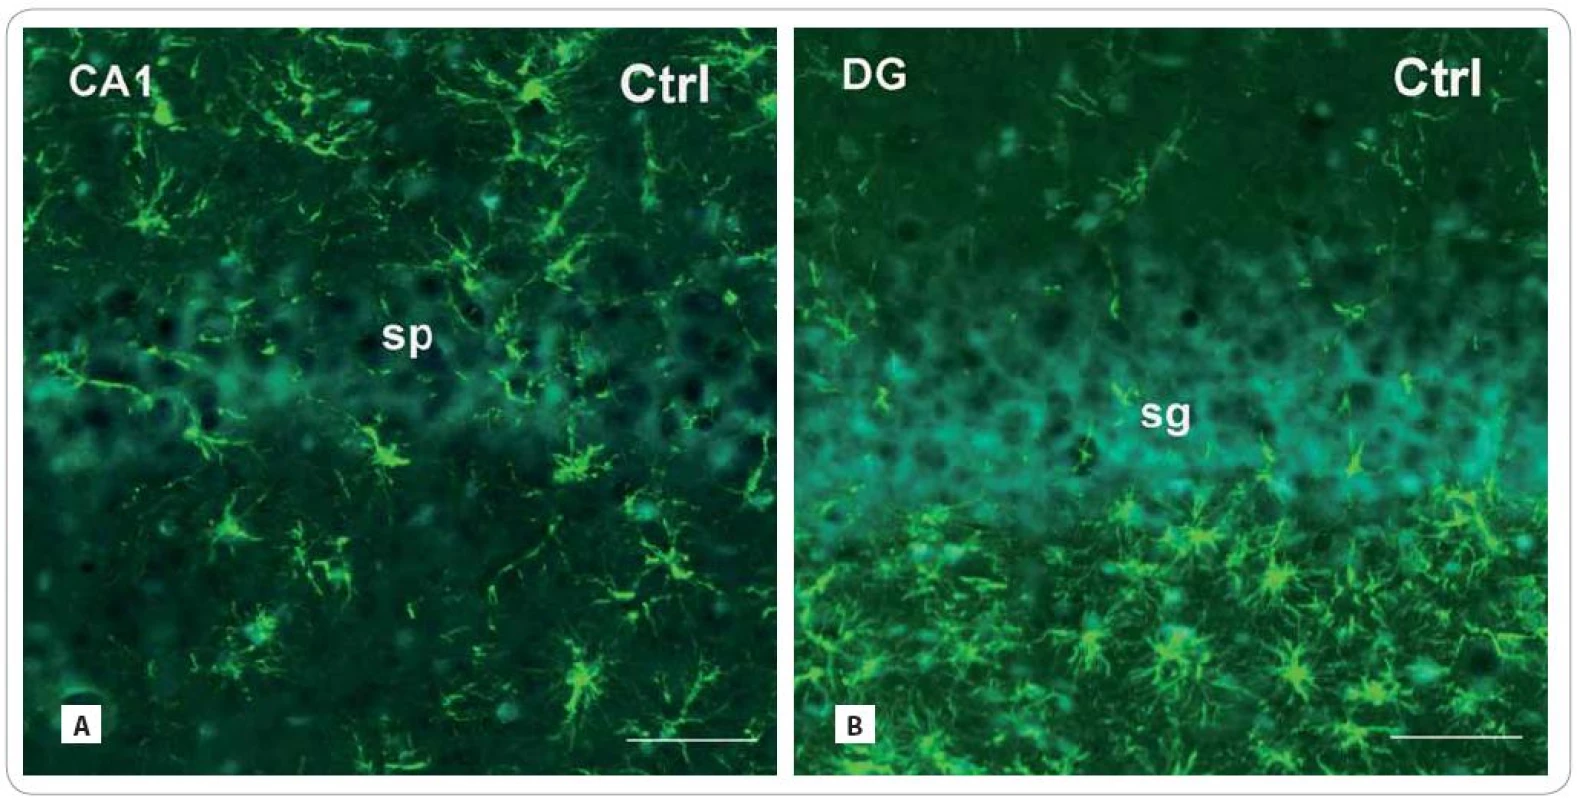 Photomicrographs of the sagittal sections through the hippocampus of adult rats showing the principal layers of the CA1 subfield and the DG: str. pyramidale (sp) and str. granulosum (sg), resp. immunofluorescent staining for detection of glial fibrillary acid protein (GFAP) (red or green fluorescent somas and processes, counterstained with blue DAPI nuclear dye), marker for mature astrocytes in control group (A, B) and in the brain of rats, investigated 30 and 100 days after fractionated irradiation (Irr-30, Irr-100) (C–F) with the total dose of 20 Gy of gamma rays.